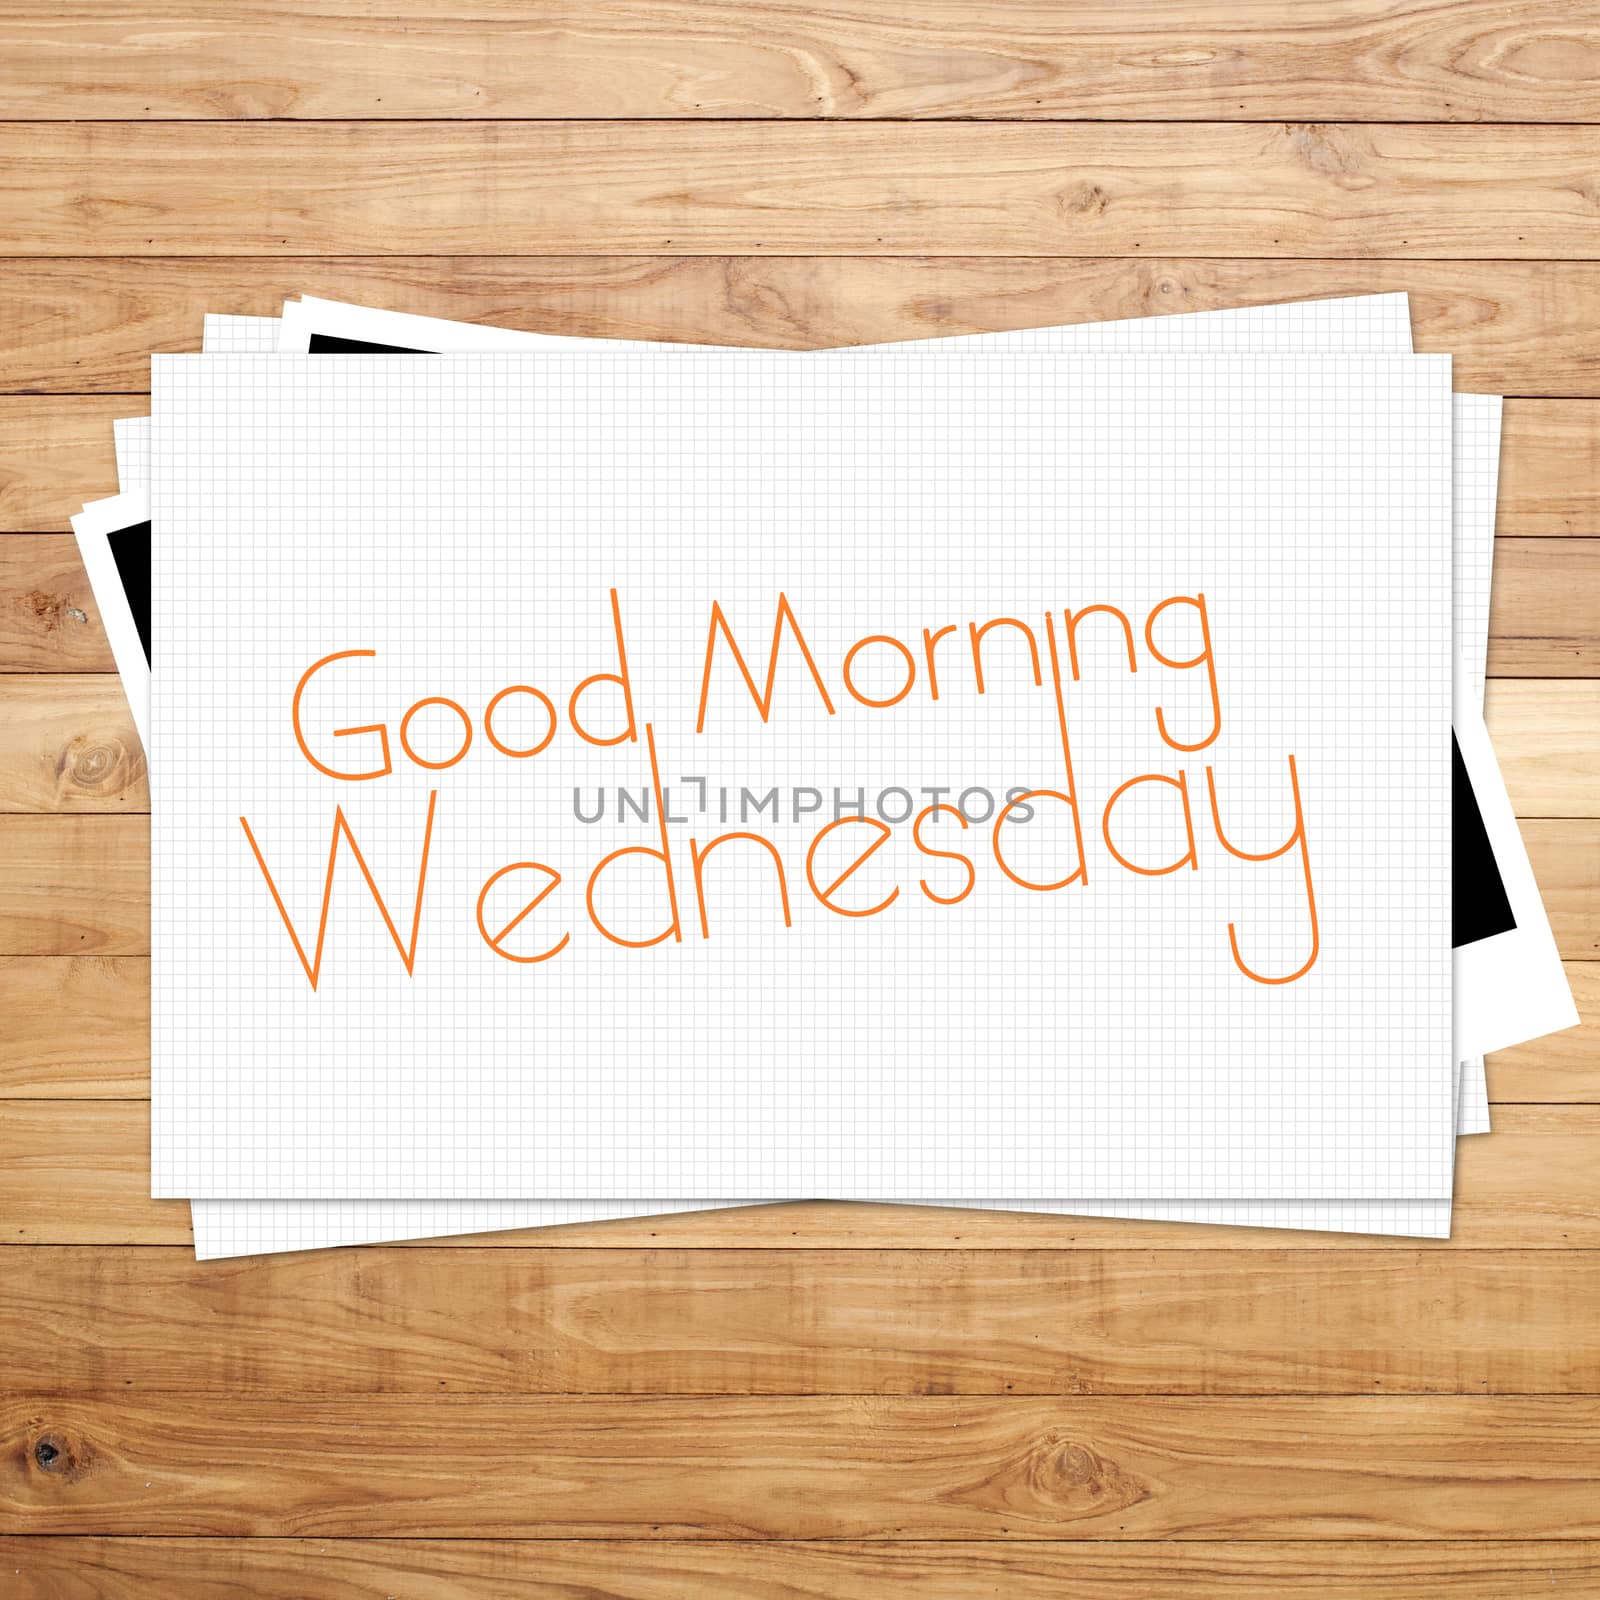 Good Morning Wednesday on paper and Brown wood plank background by 2nix